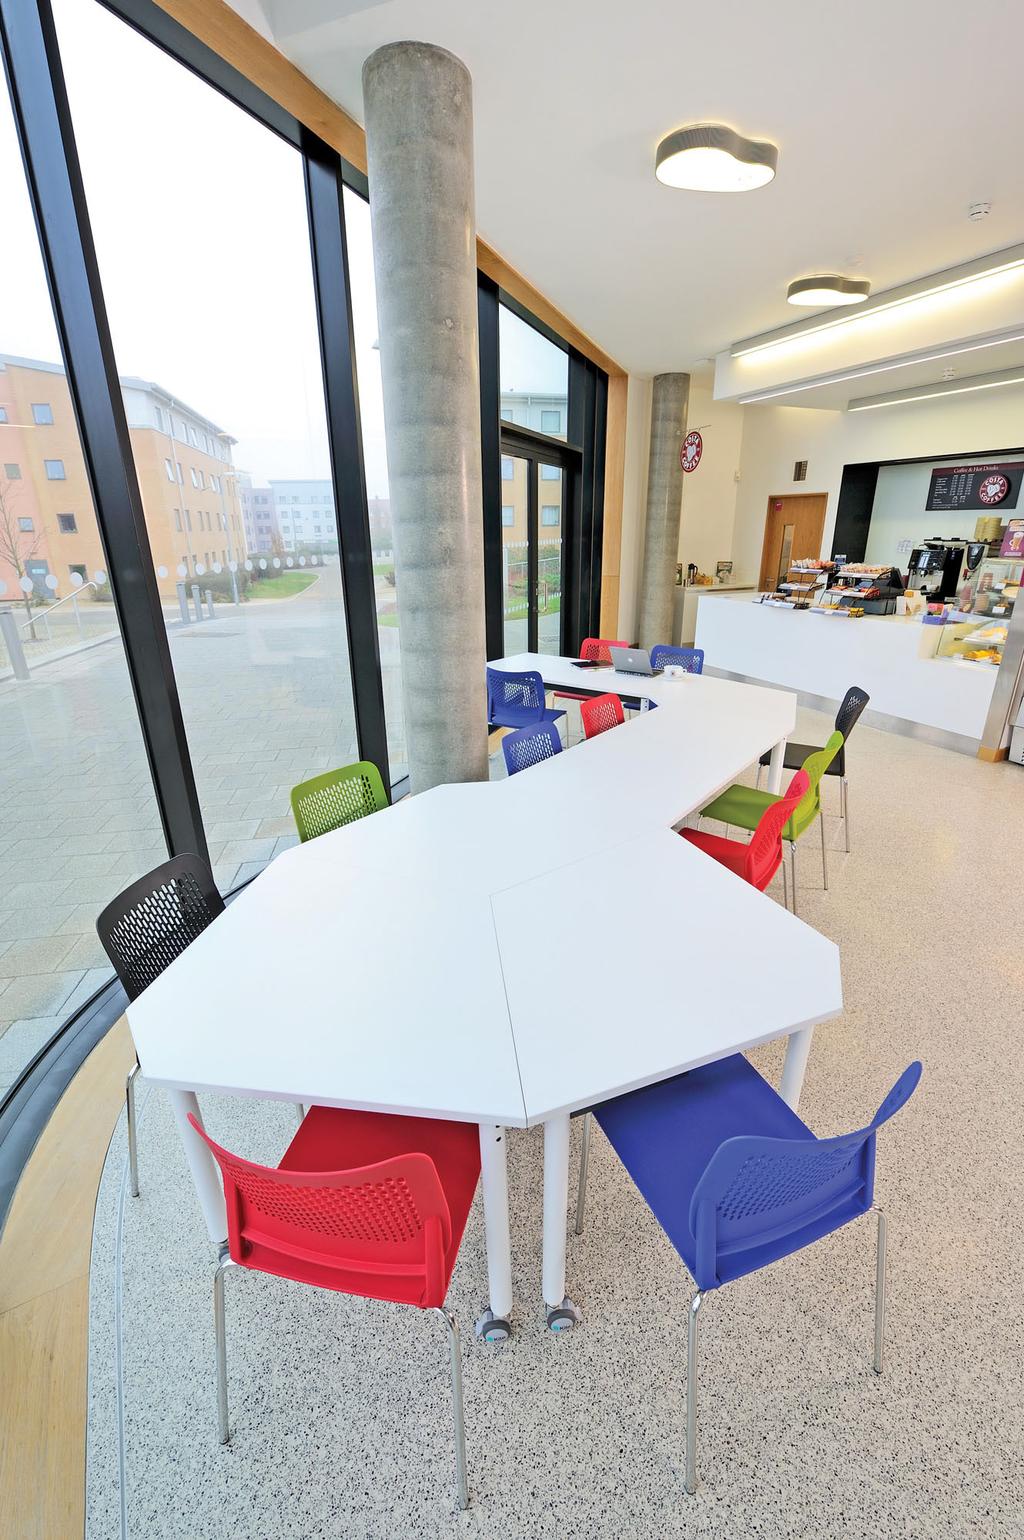 Kite cafeteria collection Making spaces go further. Often the largest space in your school is the Cafeteria.